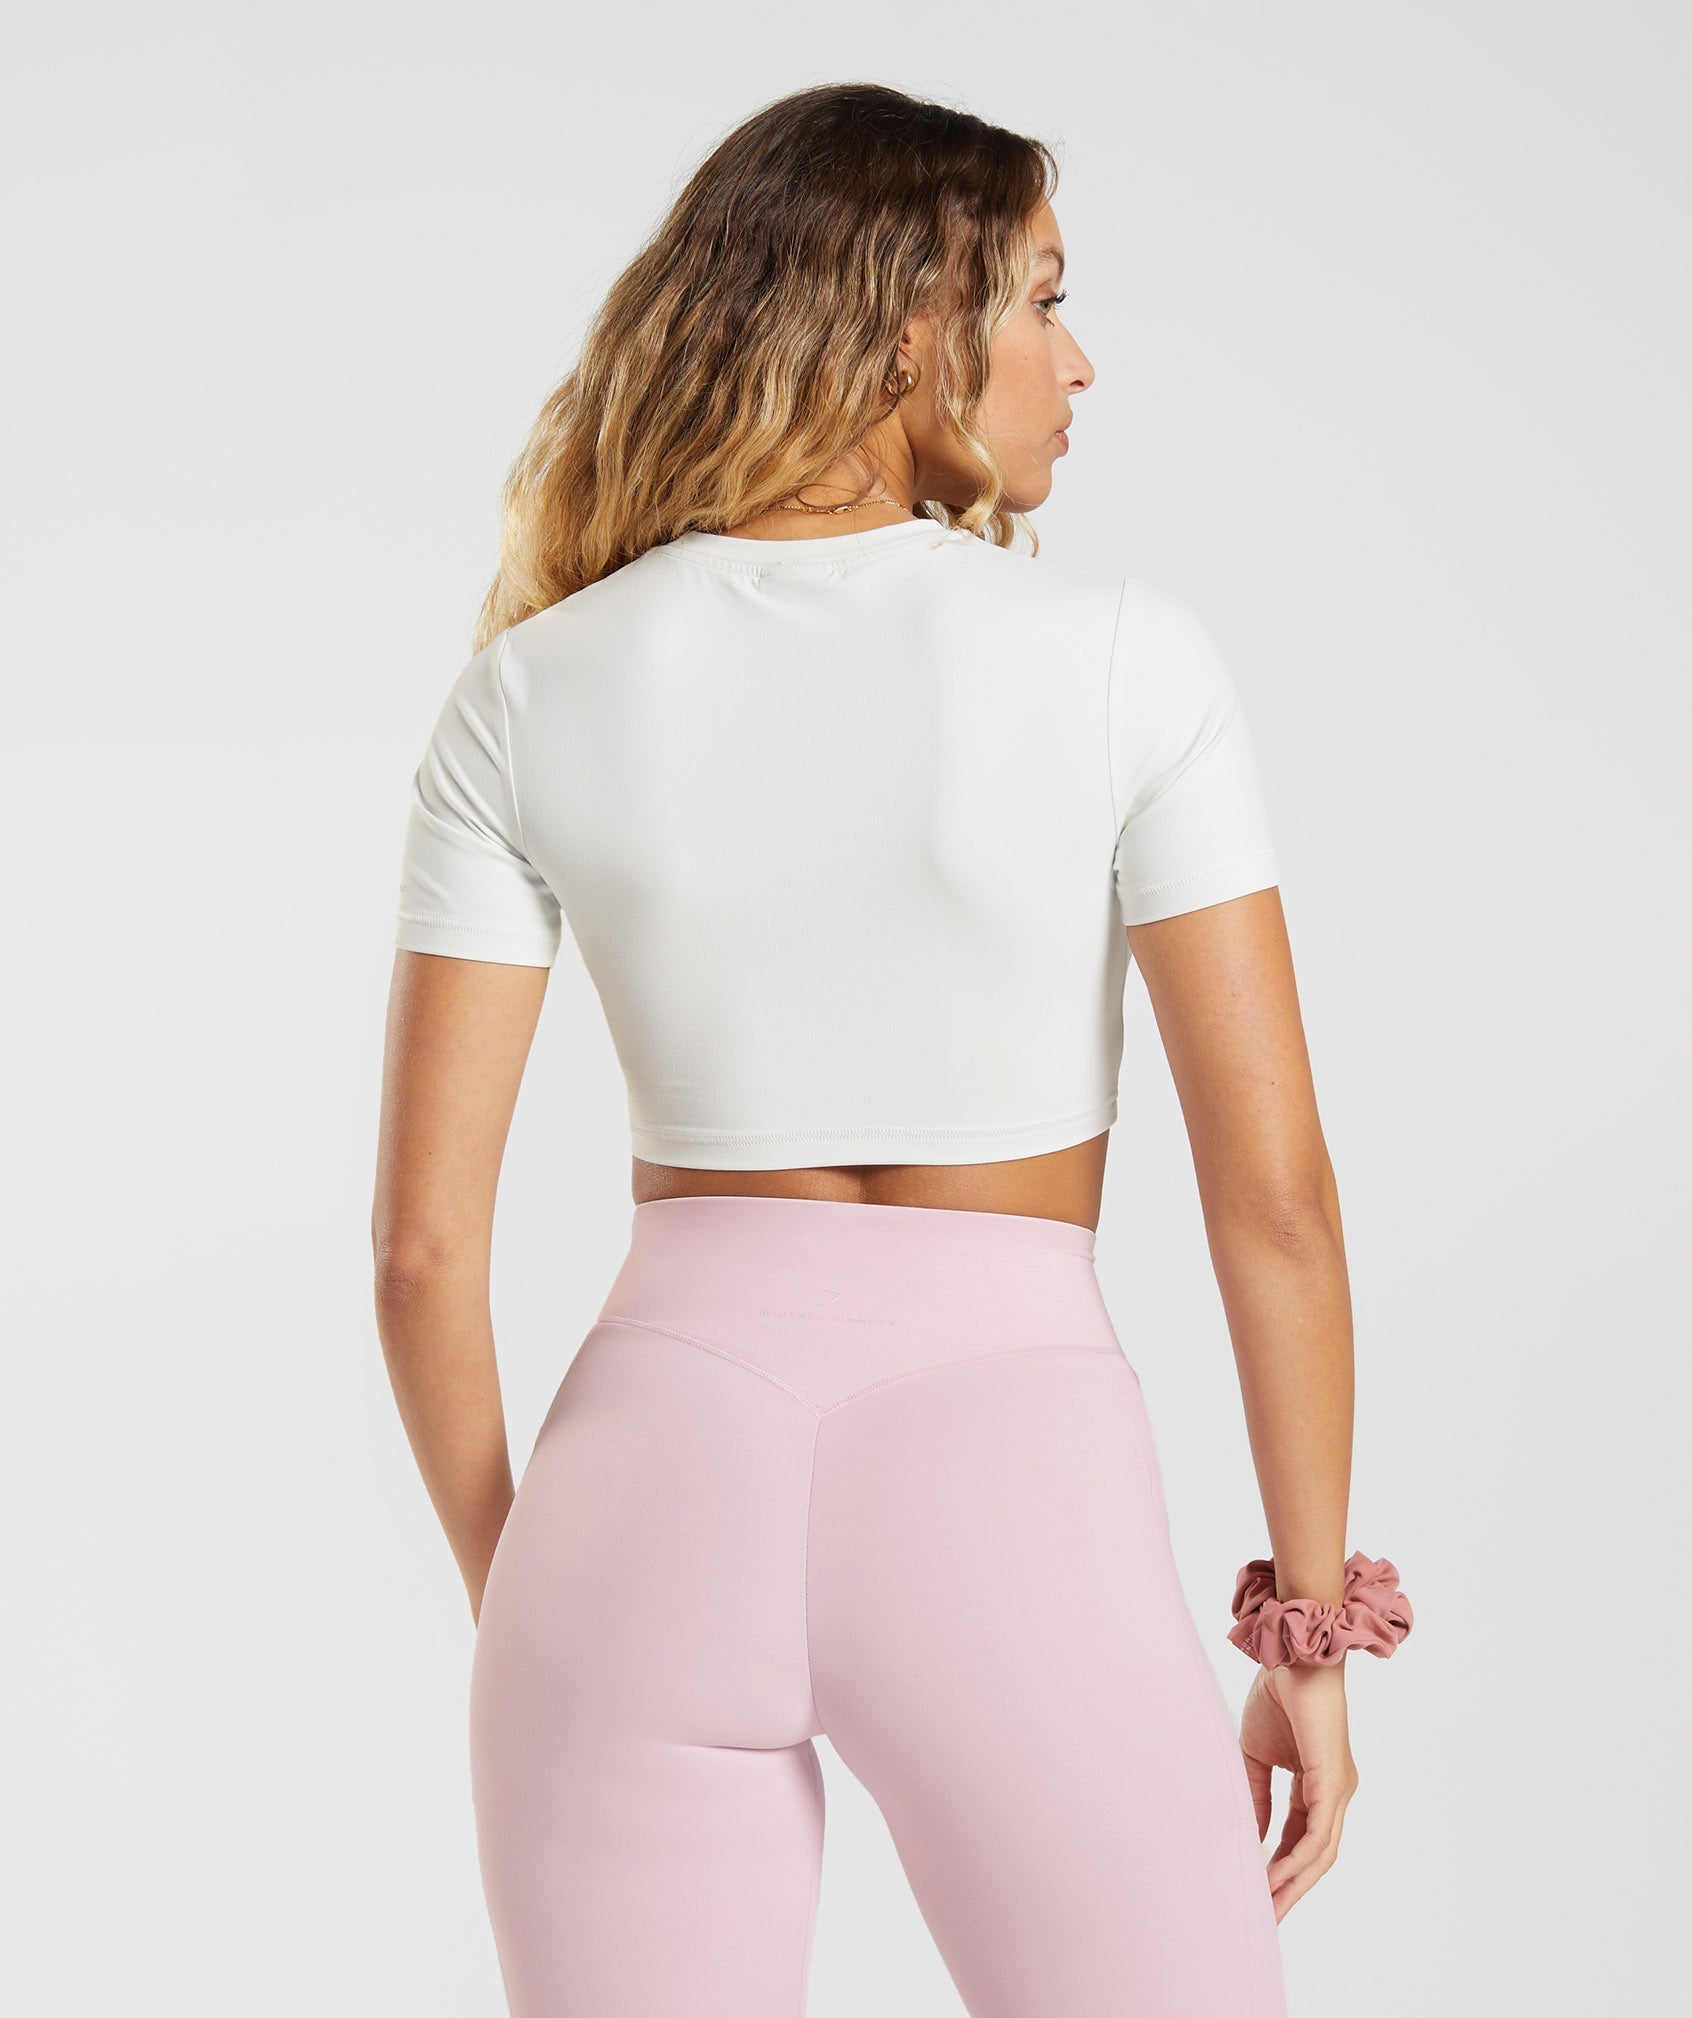 Whitney Short Sleeve Crop Top in Skylight White - view 2